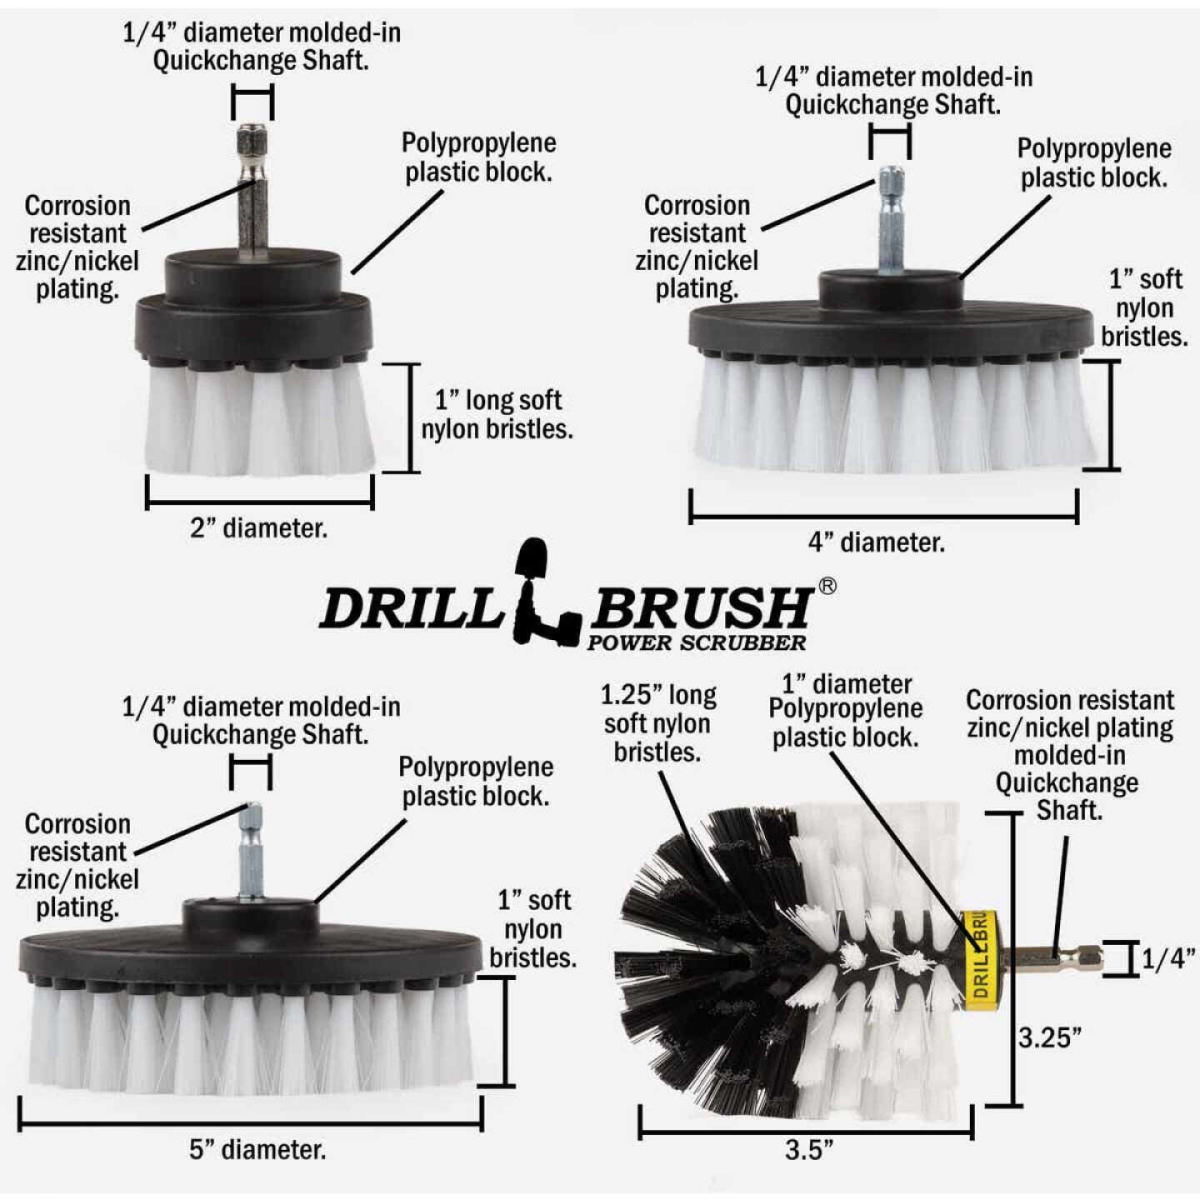 Drill Powered Attachment Safe Grill Brush Kit - Clean BBQ Grills - Wood Stoves - Outdoor Fireplace by Drillbrush